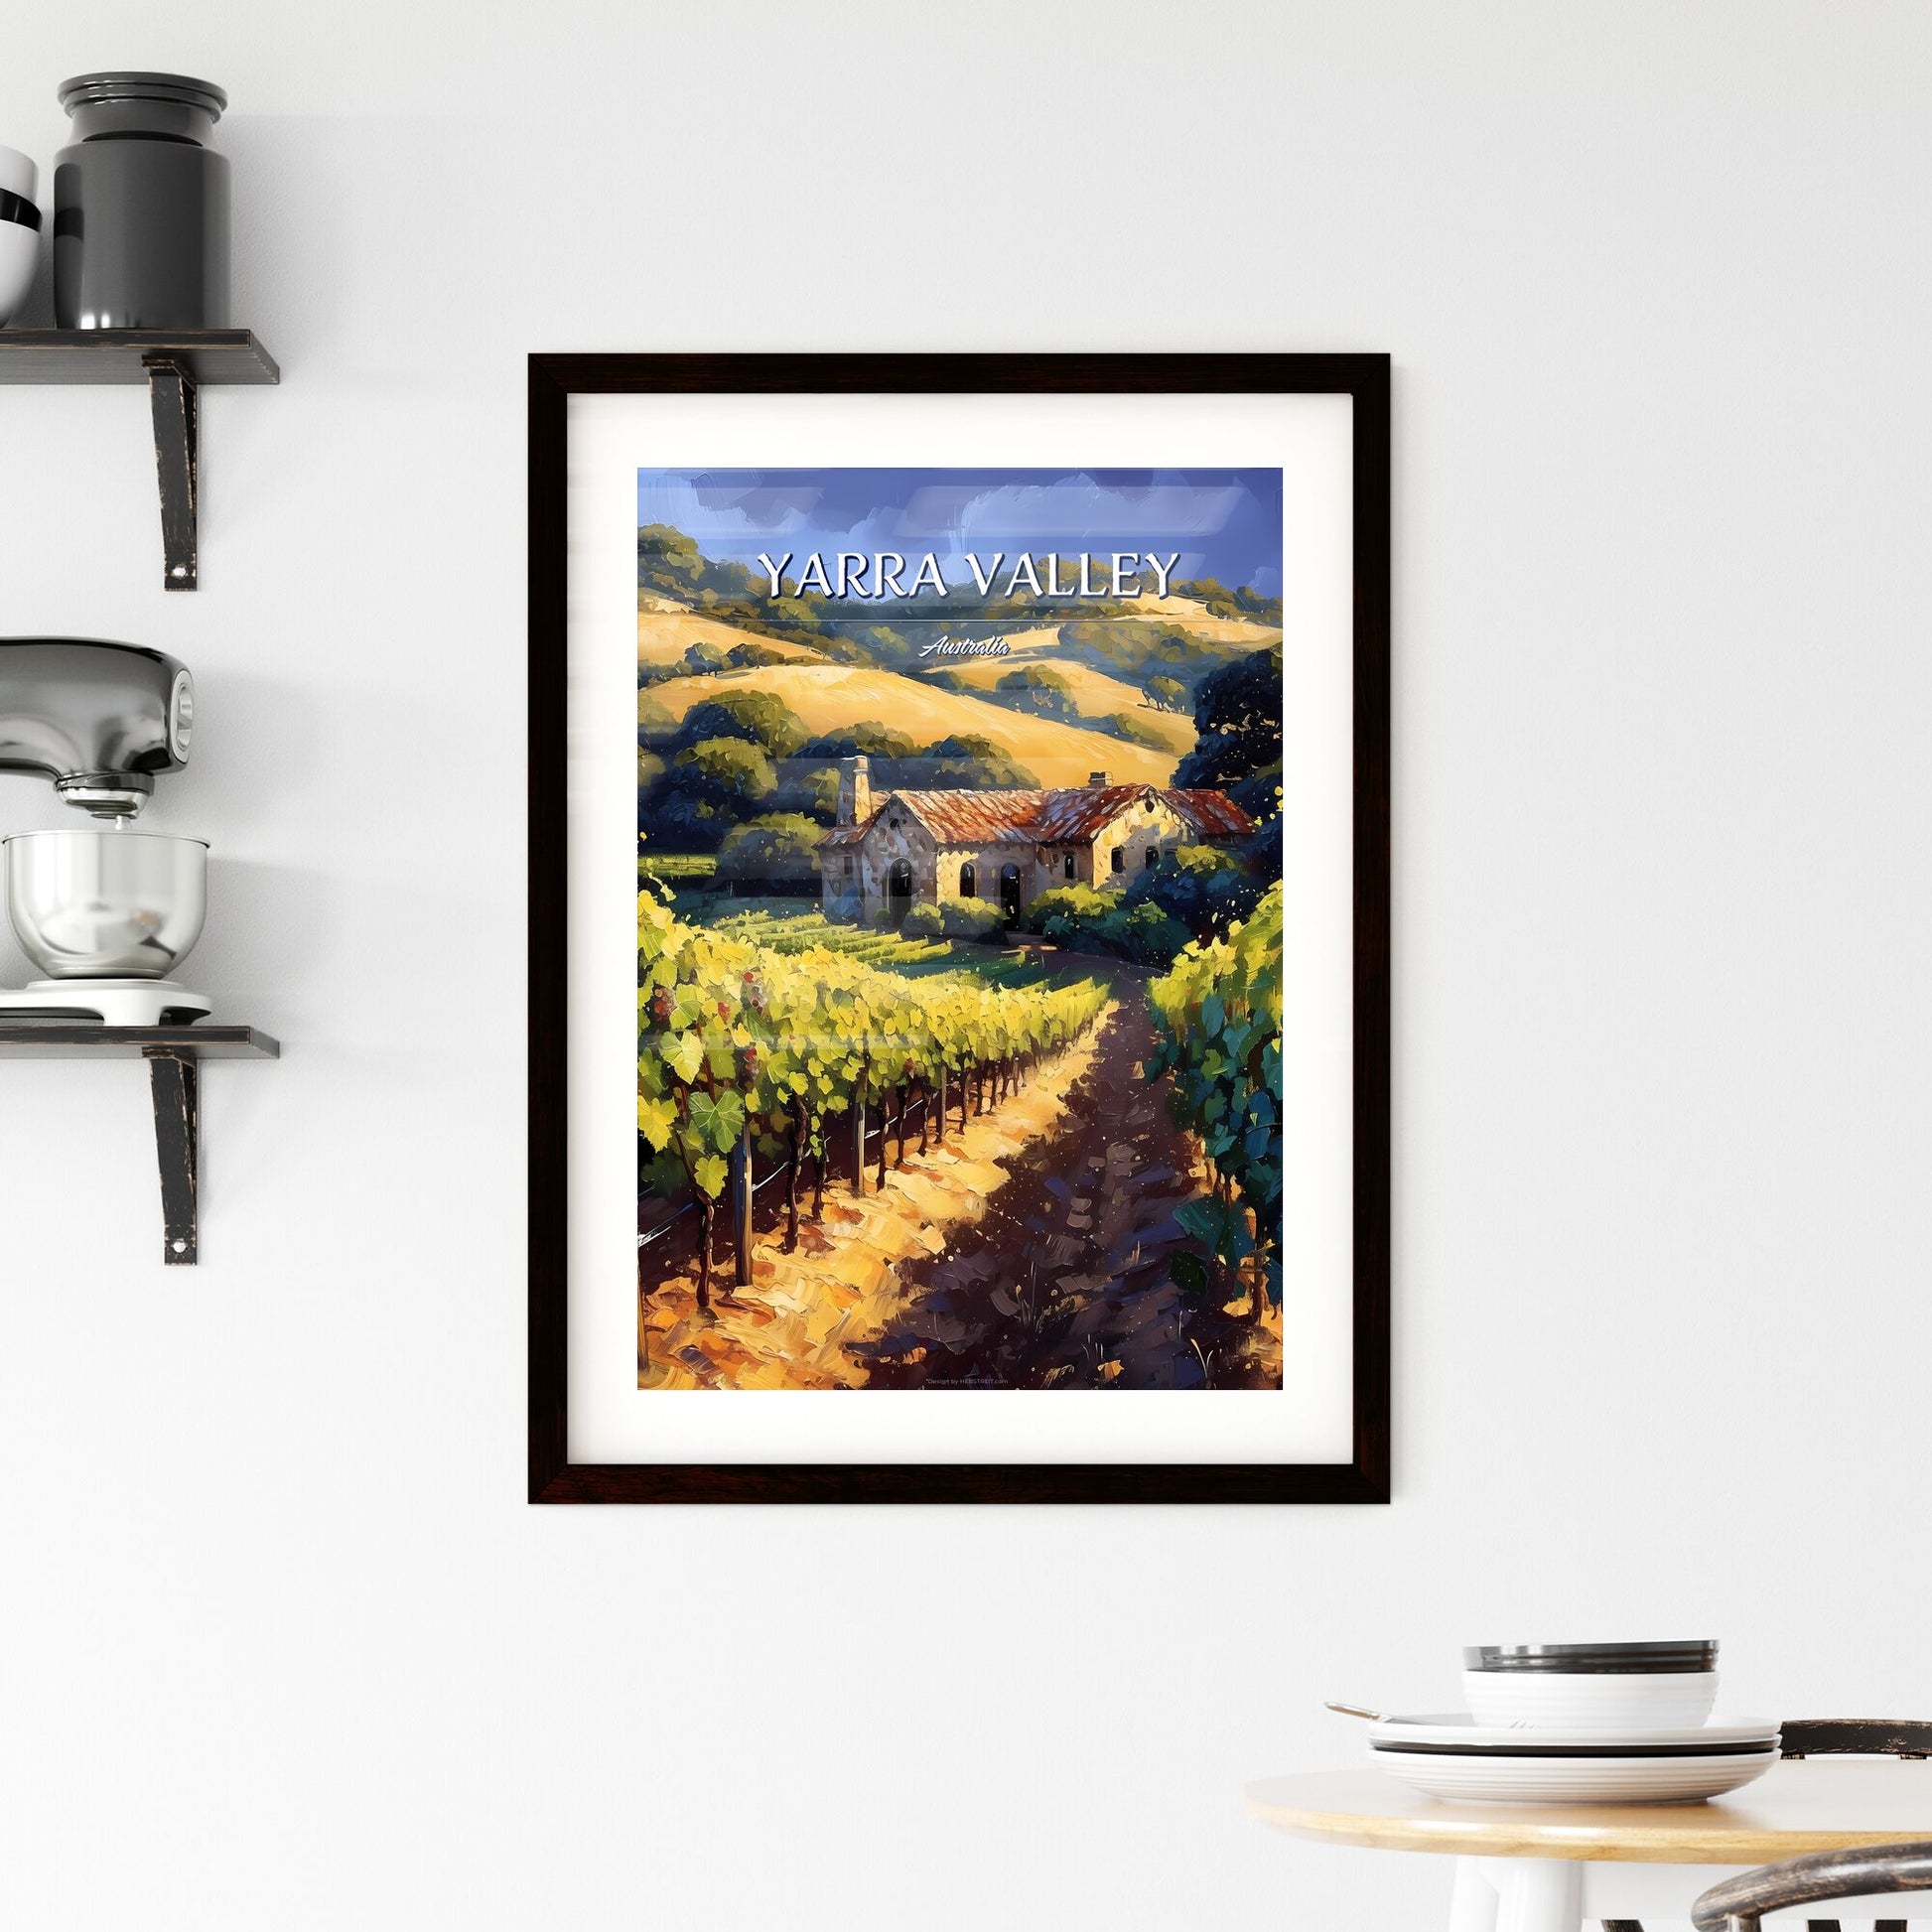 Yarra Valley, Australia - Art print of a group of green leaves on a wooden surface Default Title